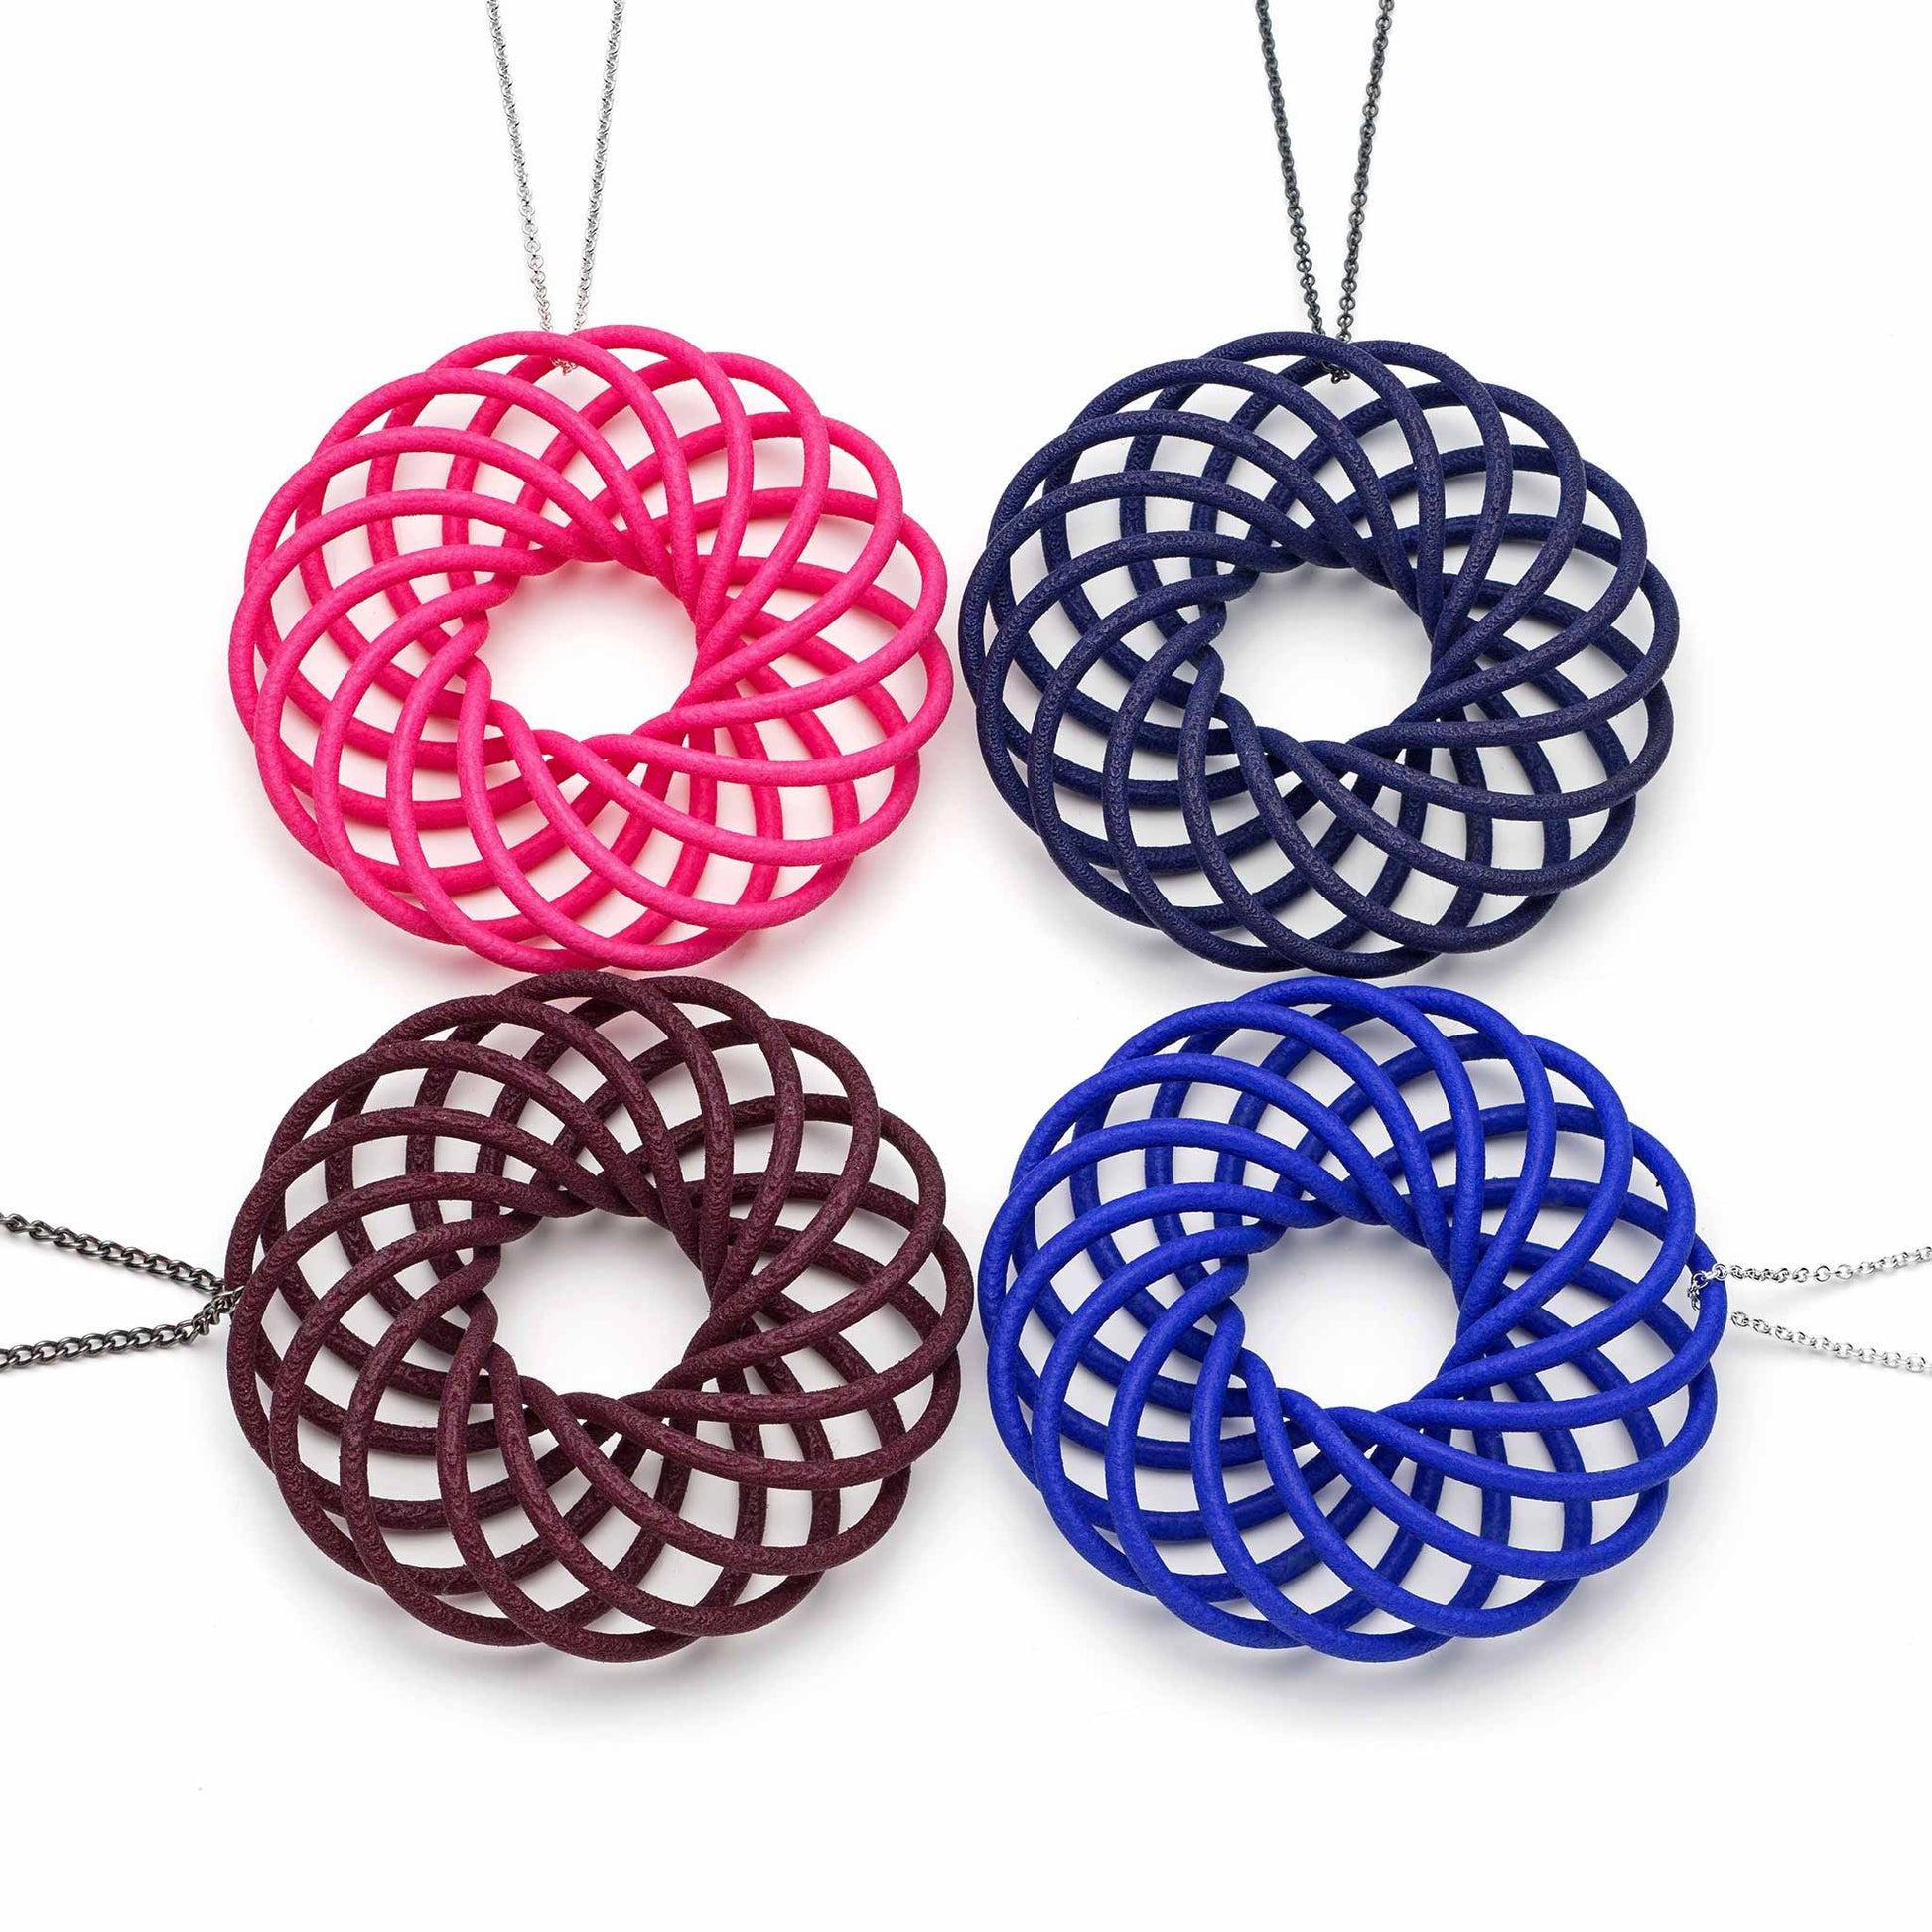 Four colourful Vortex 3D printed nylon pendants on silver chains by Katy Luxton Jewellery